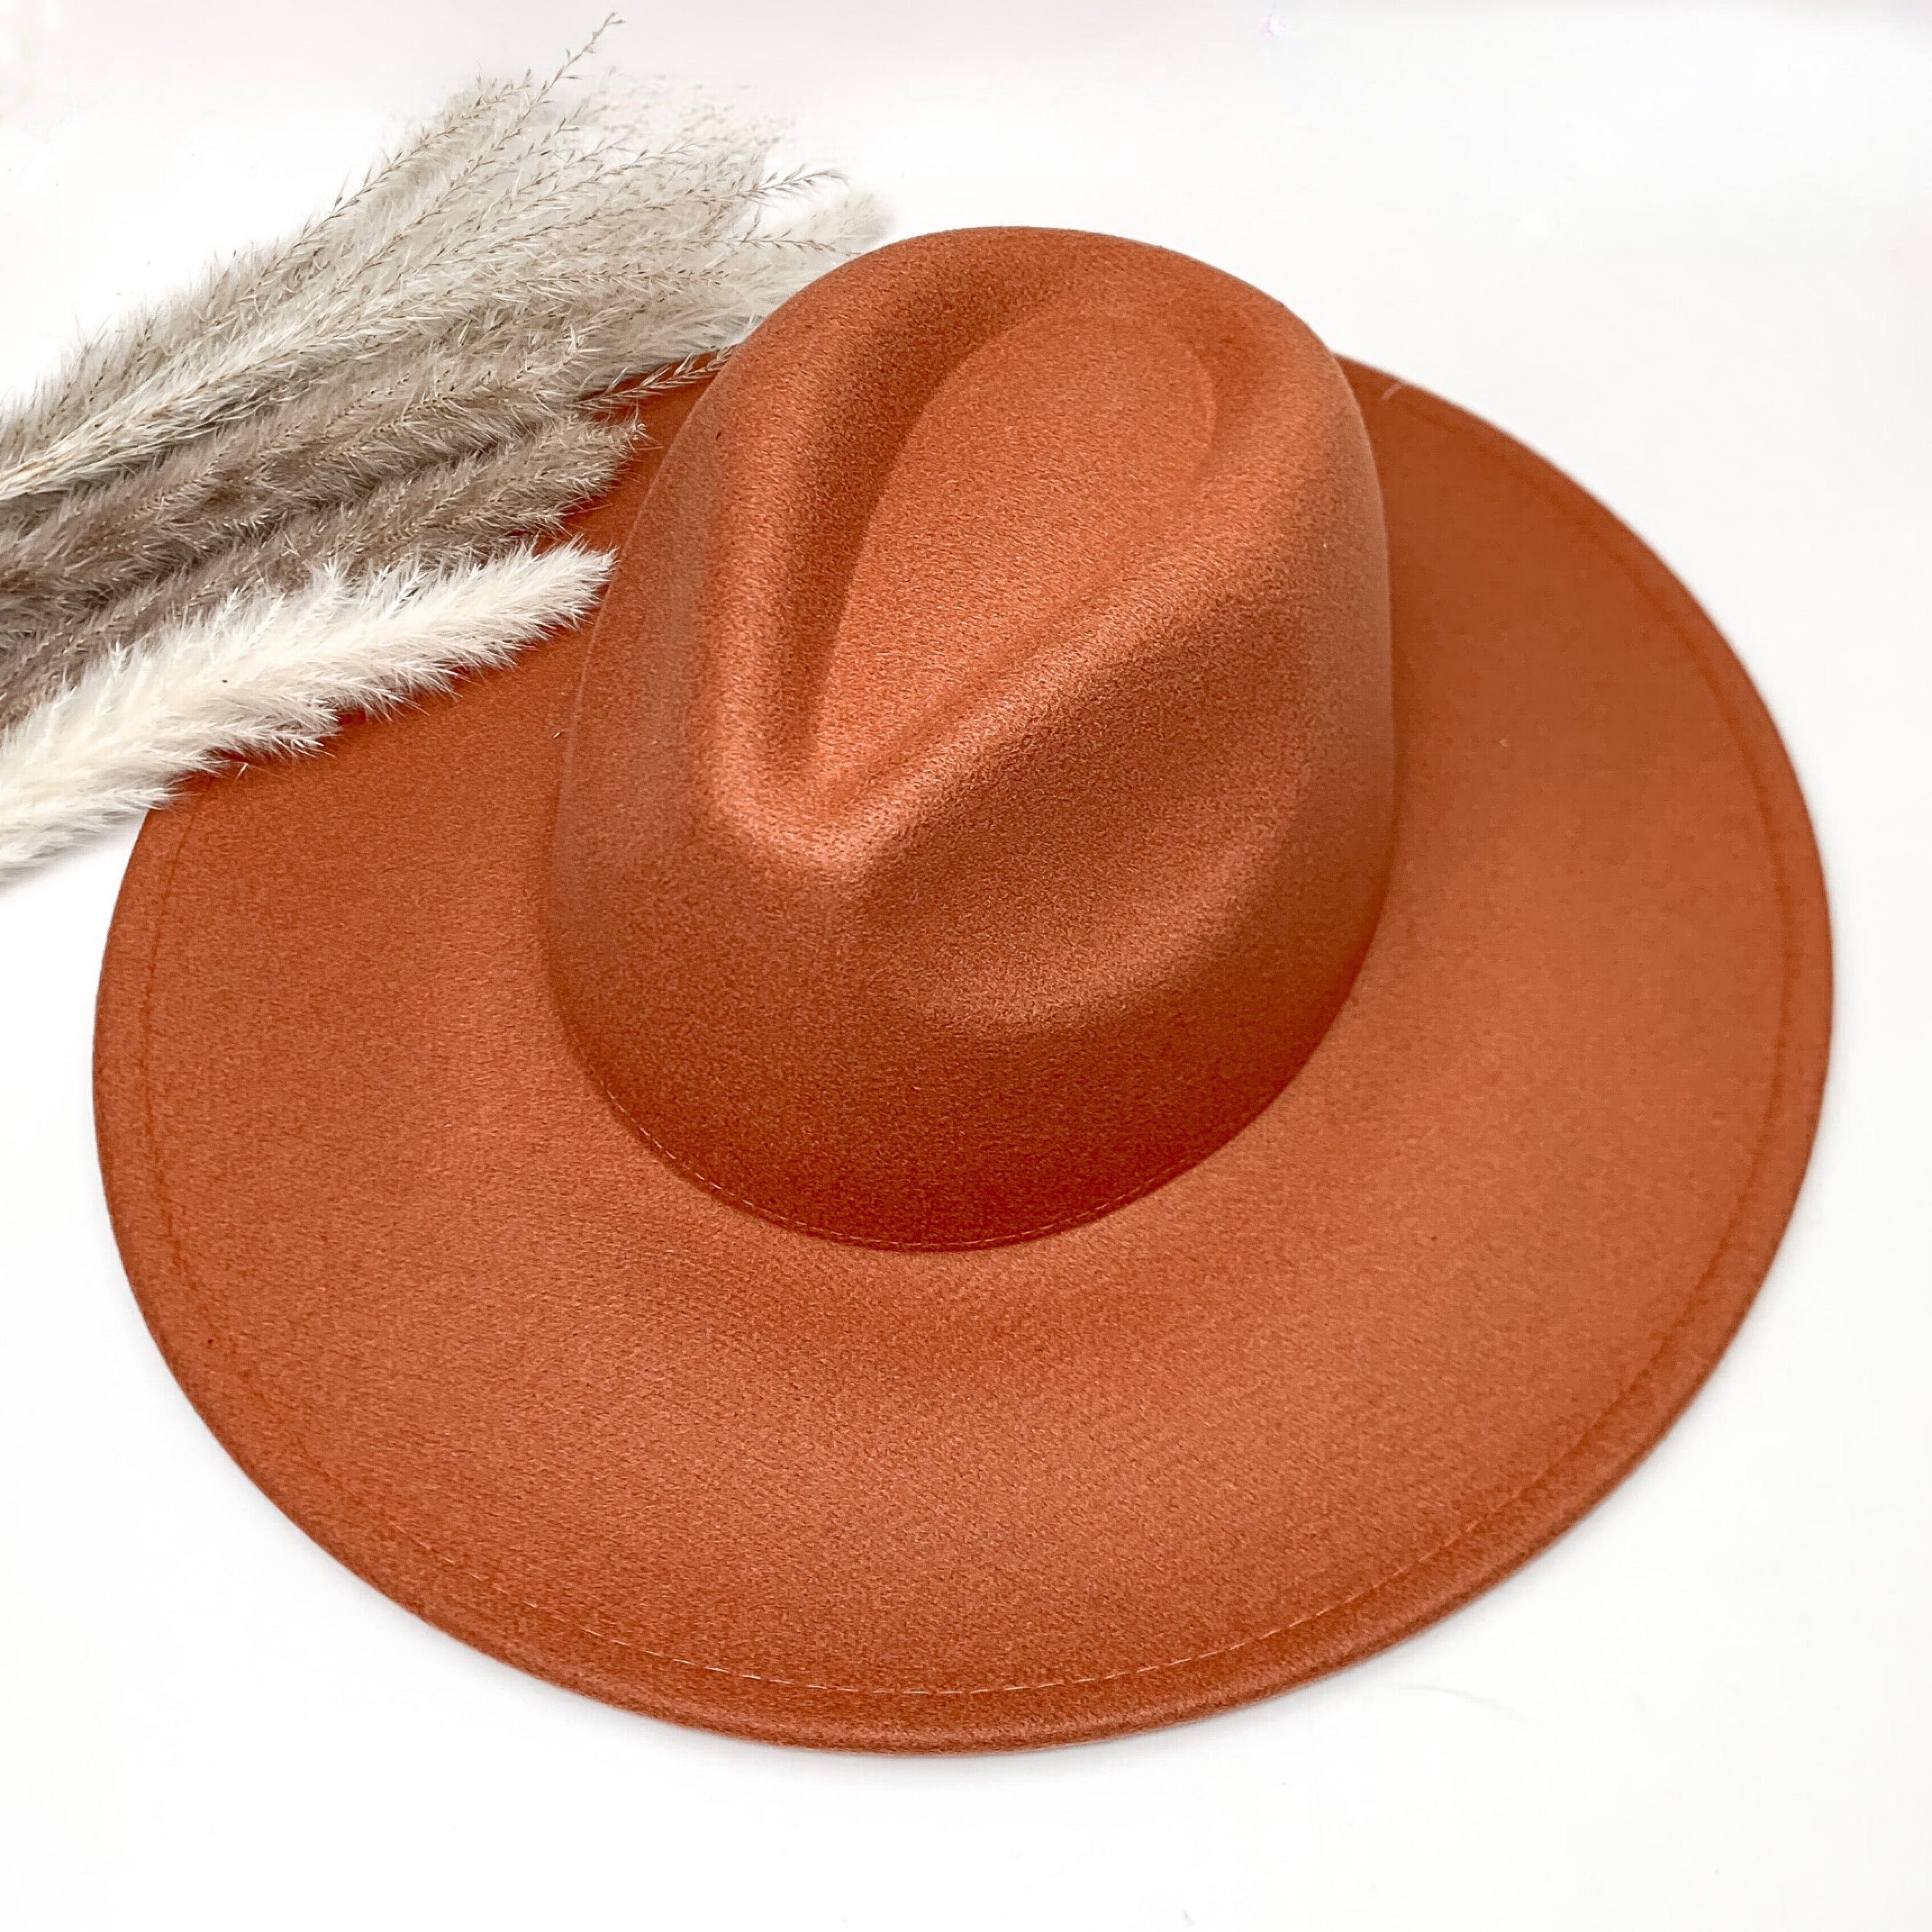 Plain and simple faux felt hat in rust orange color. This hat is sitting on a white background. There is brown and white feathers to the left of the hat.